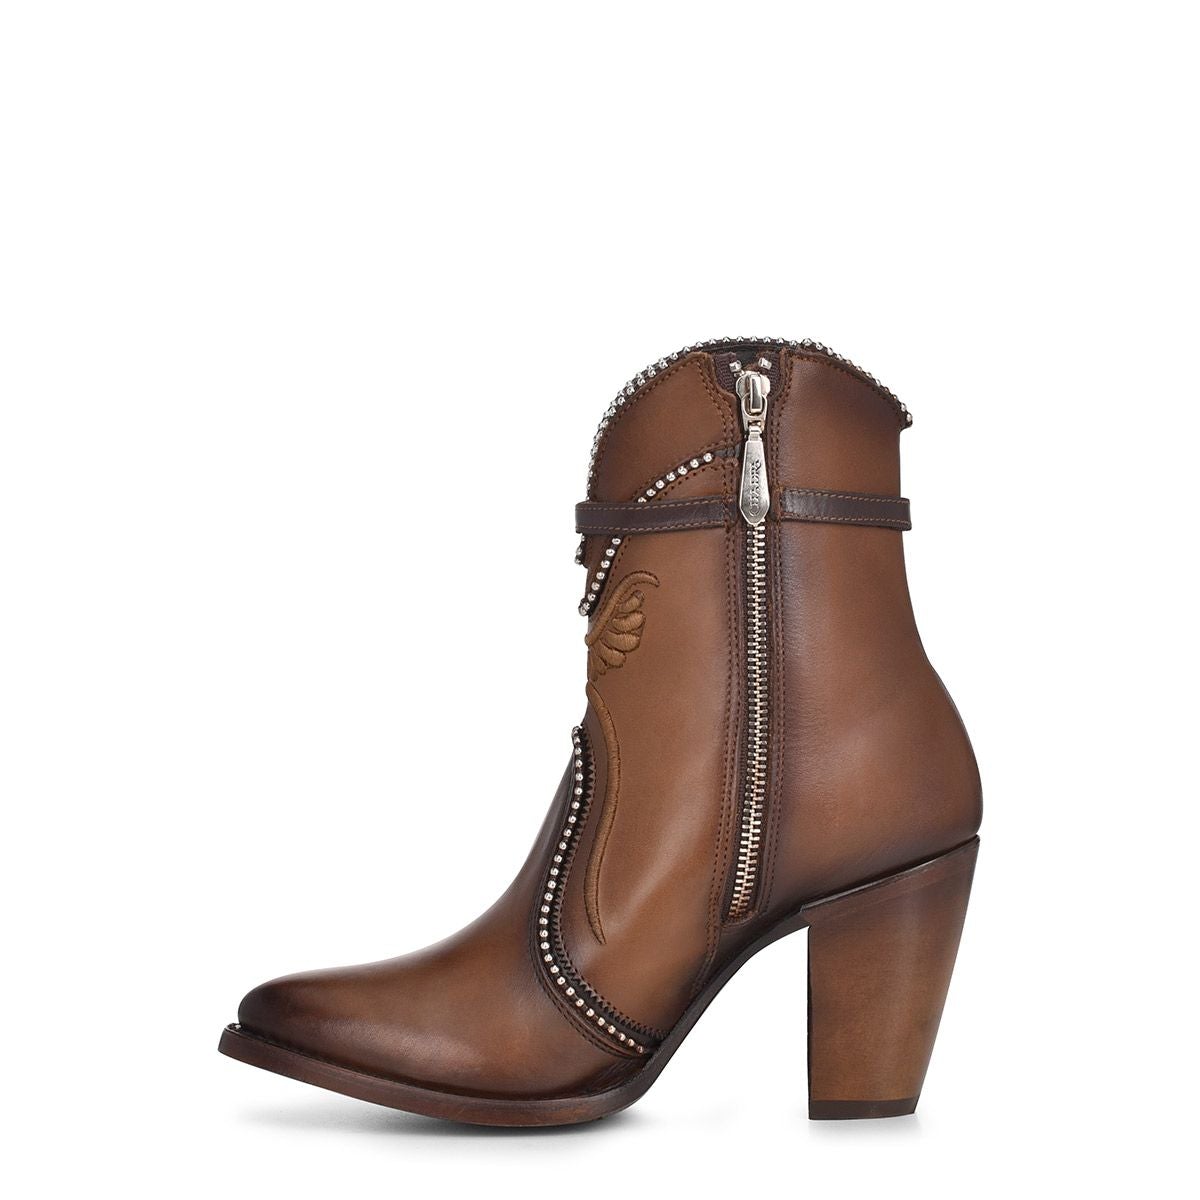 3F59RS - Cuadra brown western cowgirl cowhide leather dress ankle boots women-Kuet.us